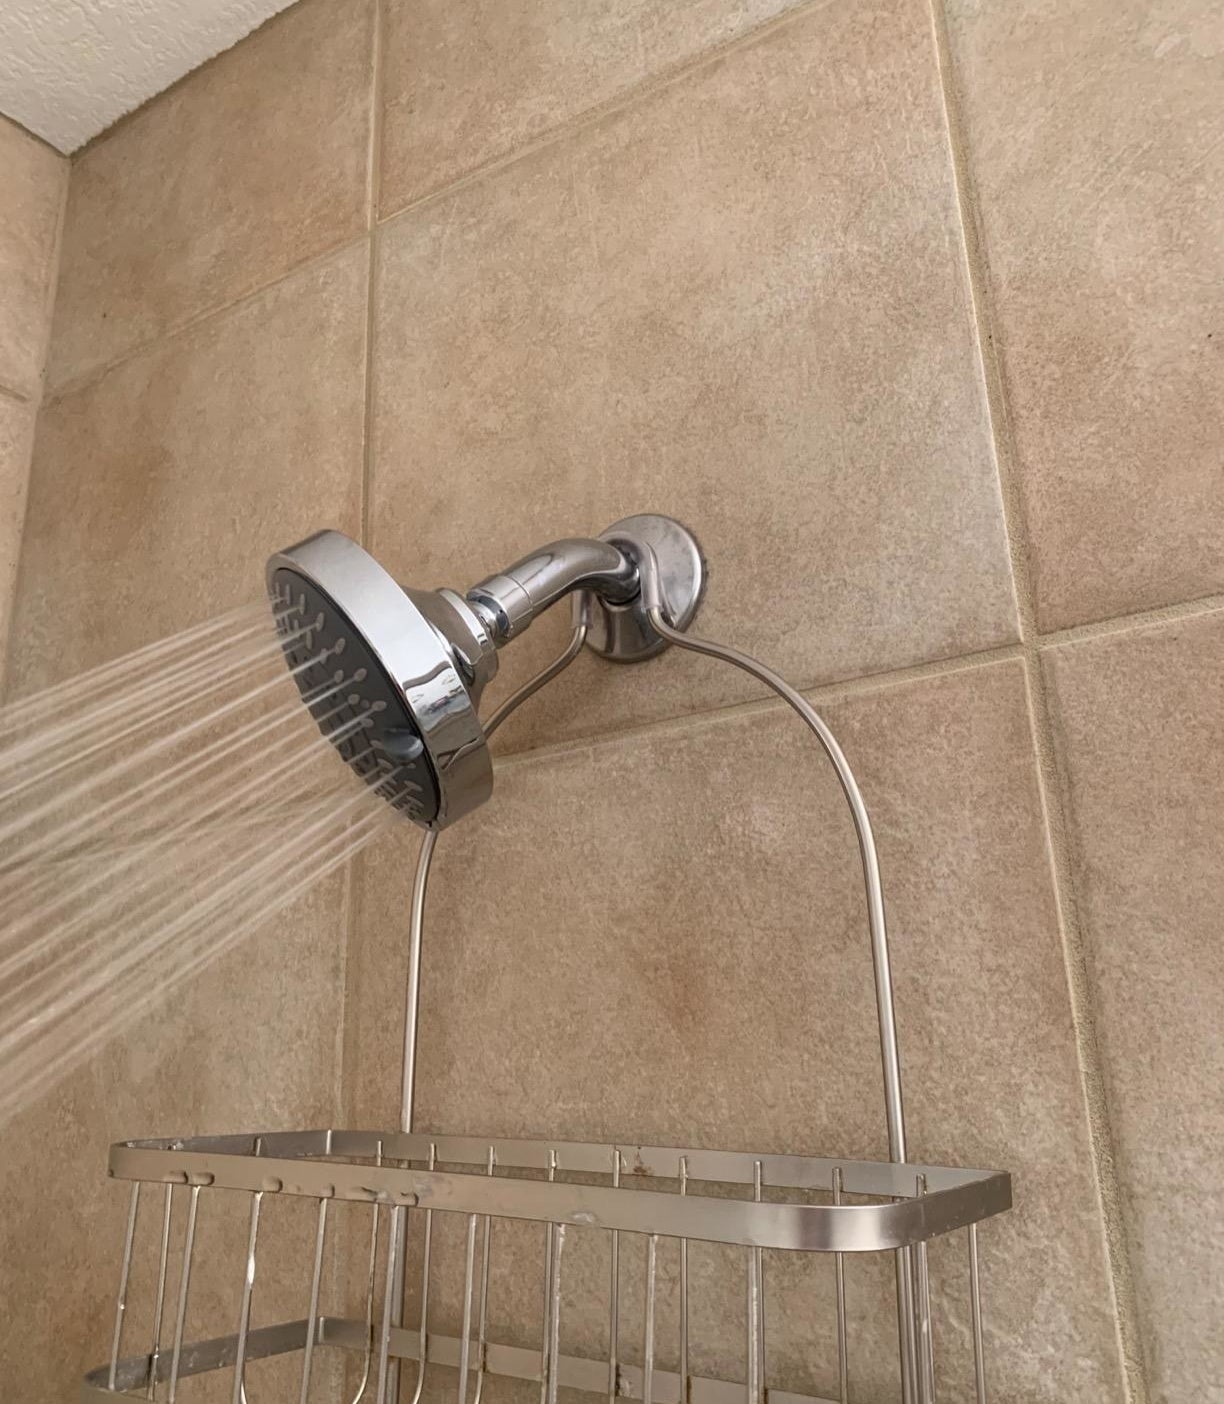 reviewer image of the warmspray shower head spraying high pressure water on the rain setting